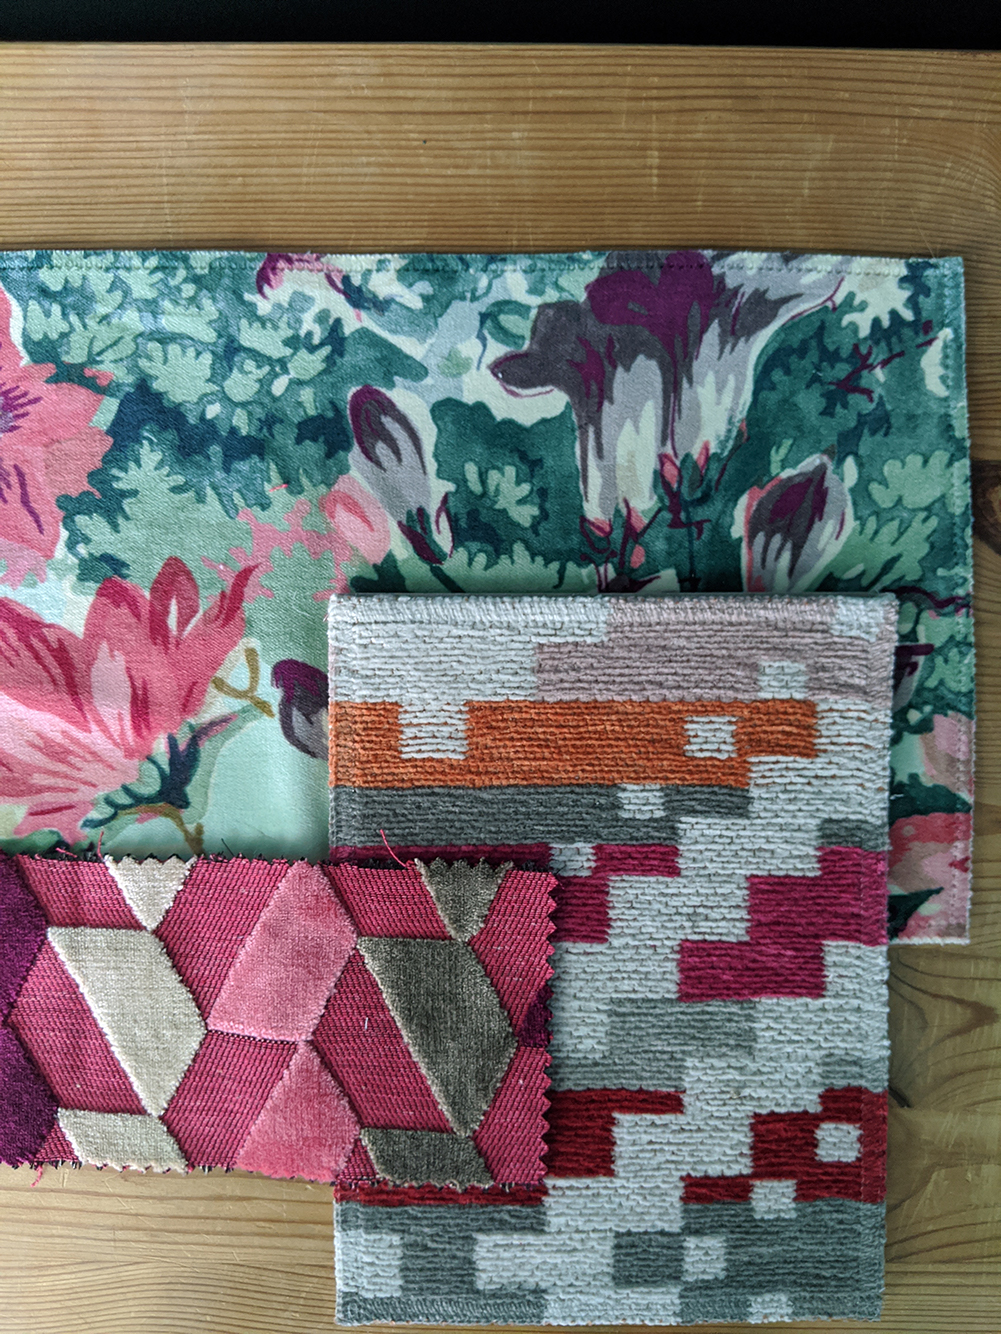 A photo of the rug and cushions fabric samples together.